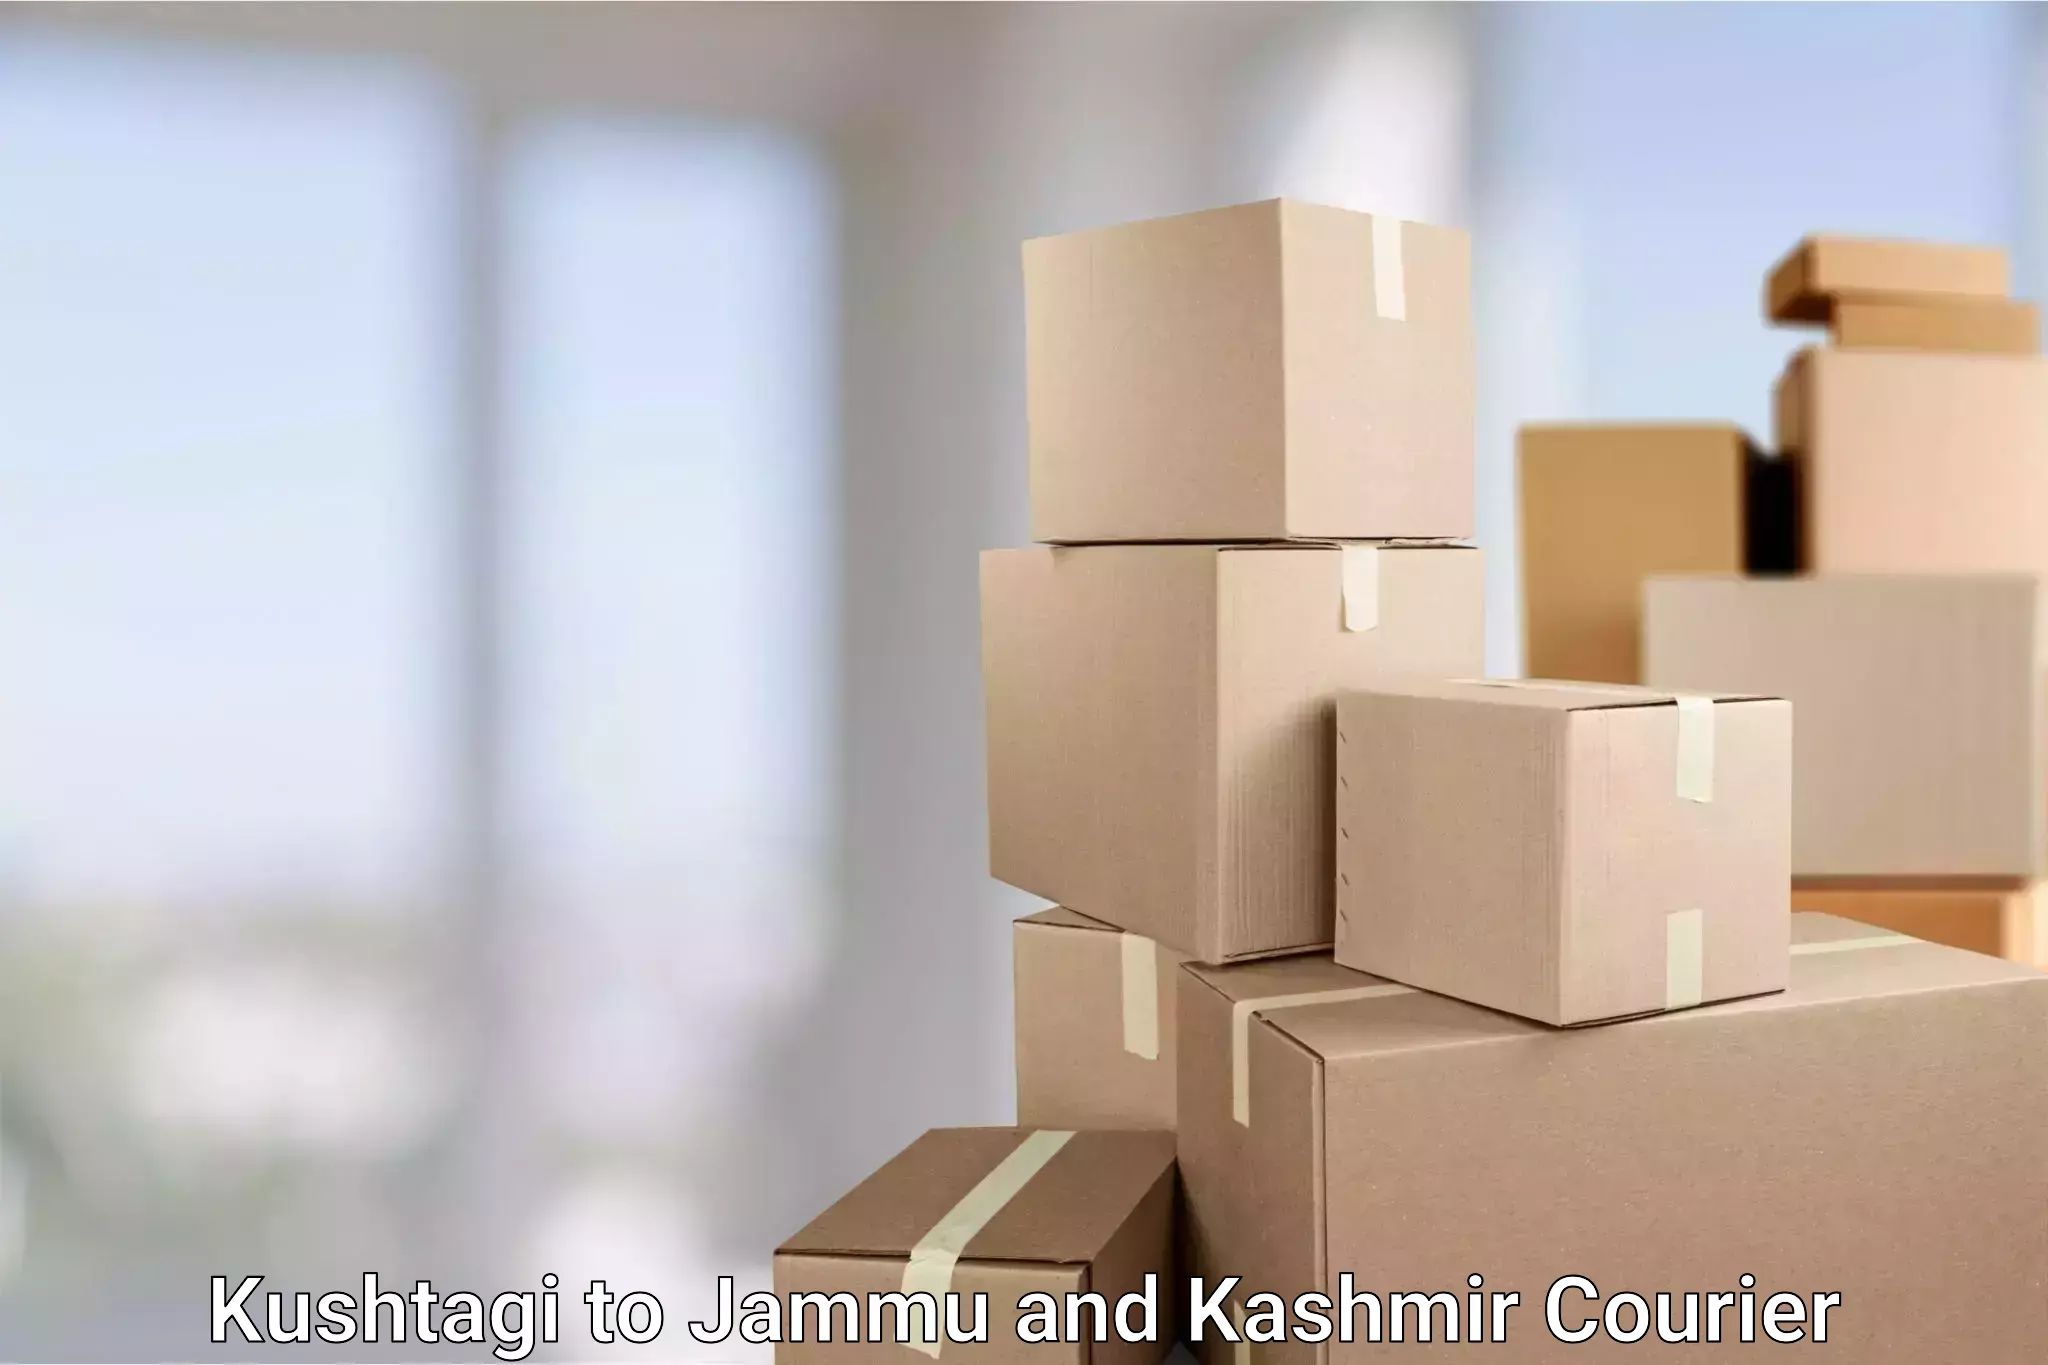 Easy access courier services in Kushtagi to Samba